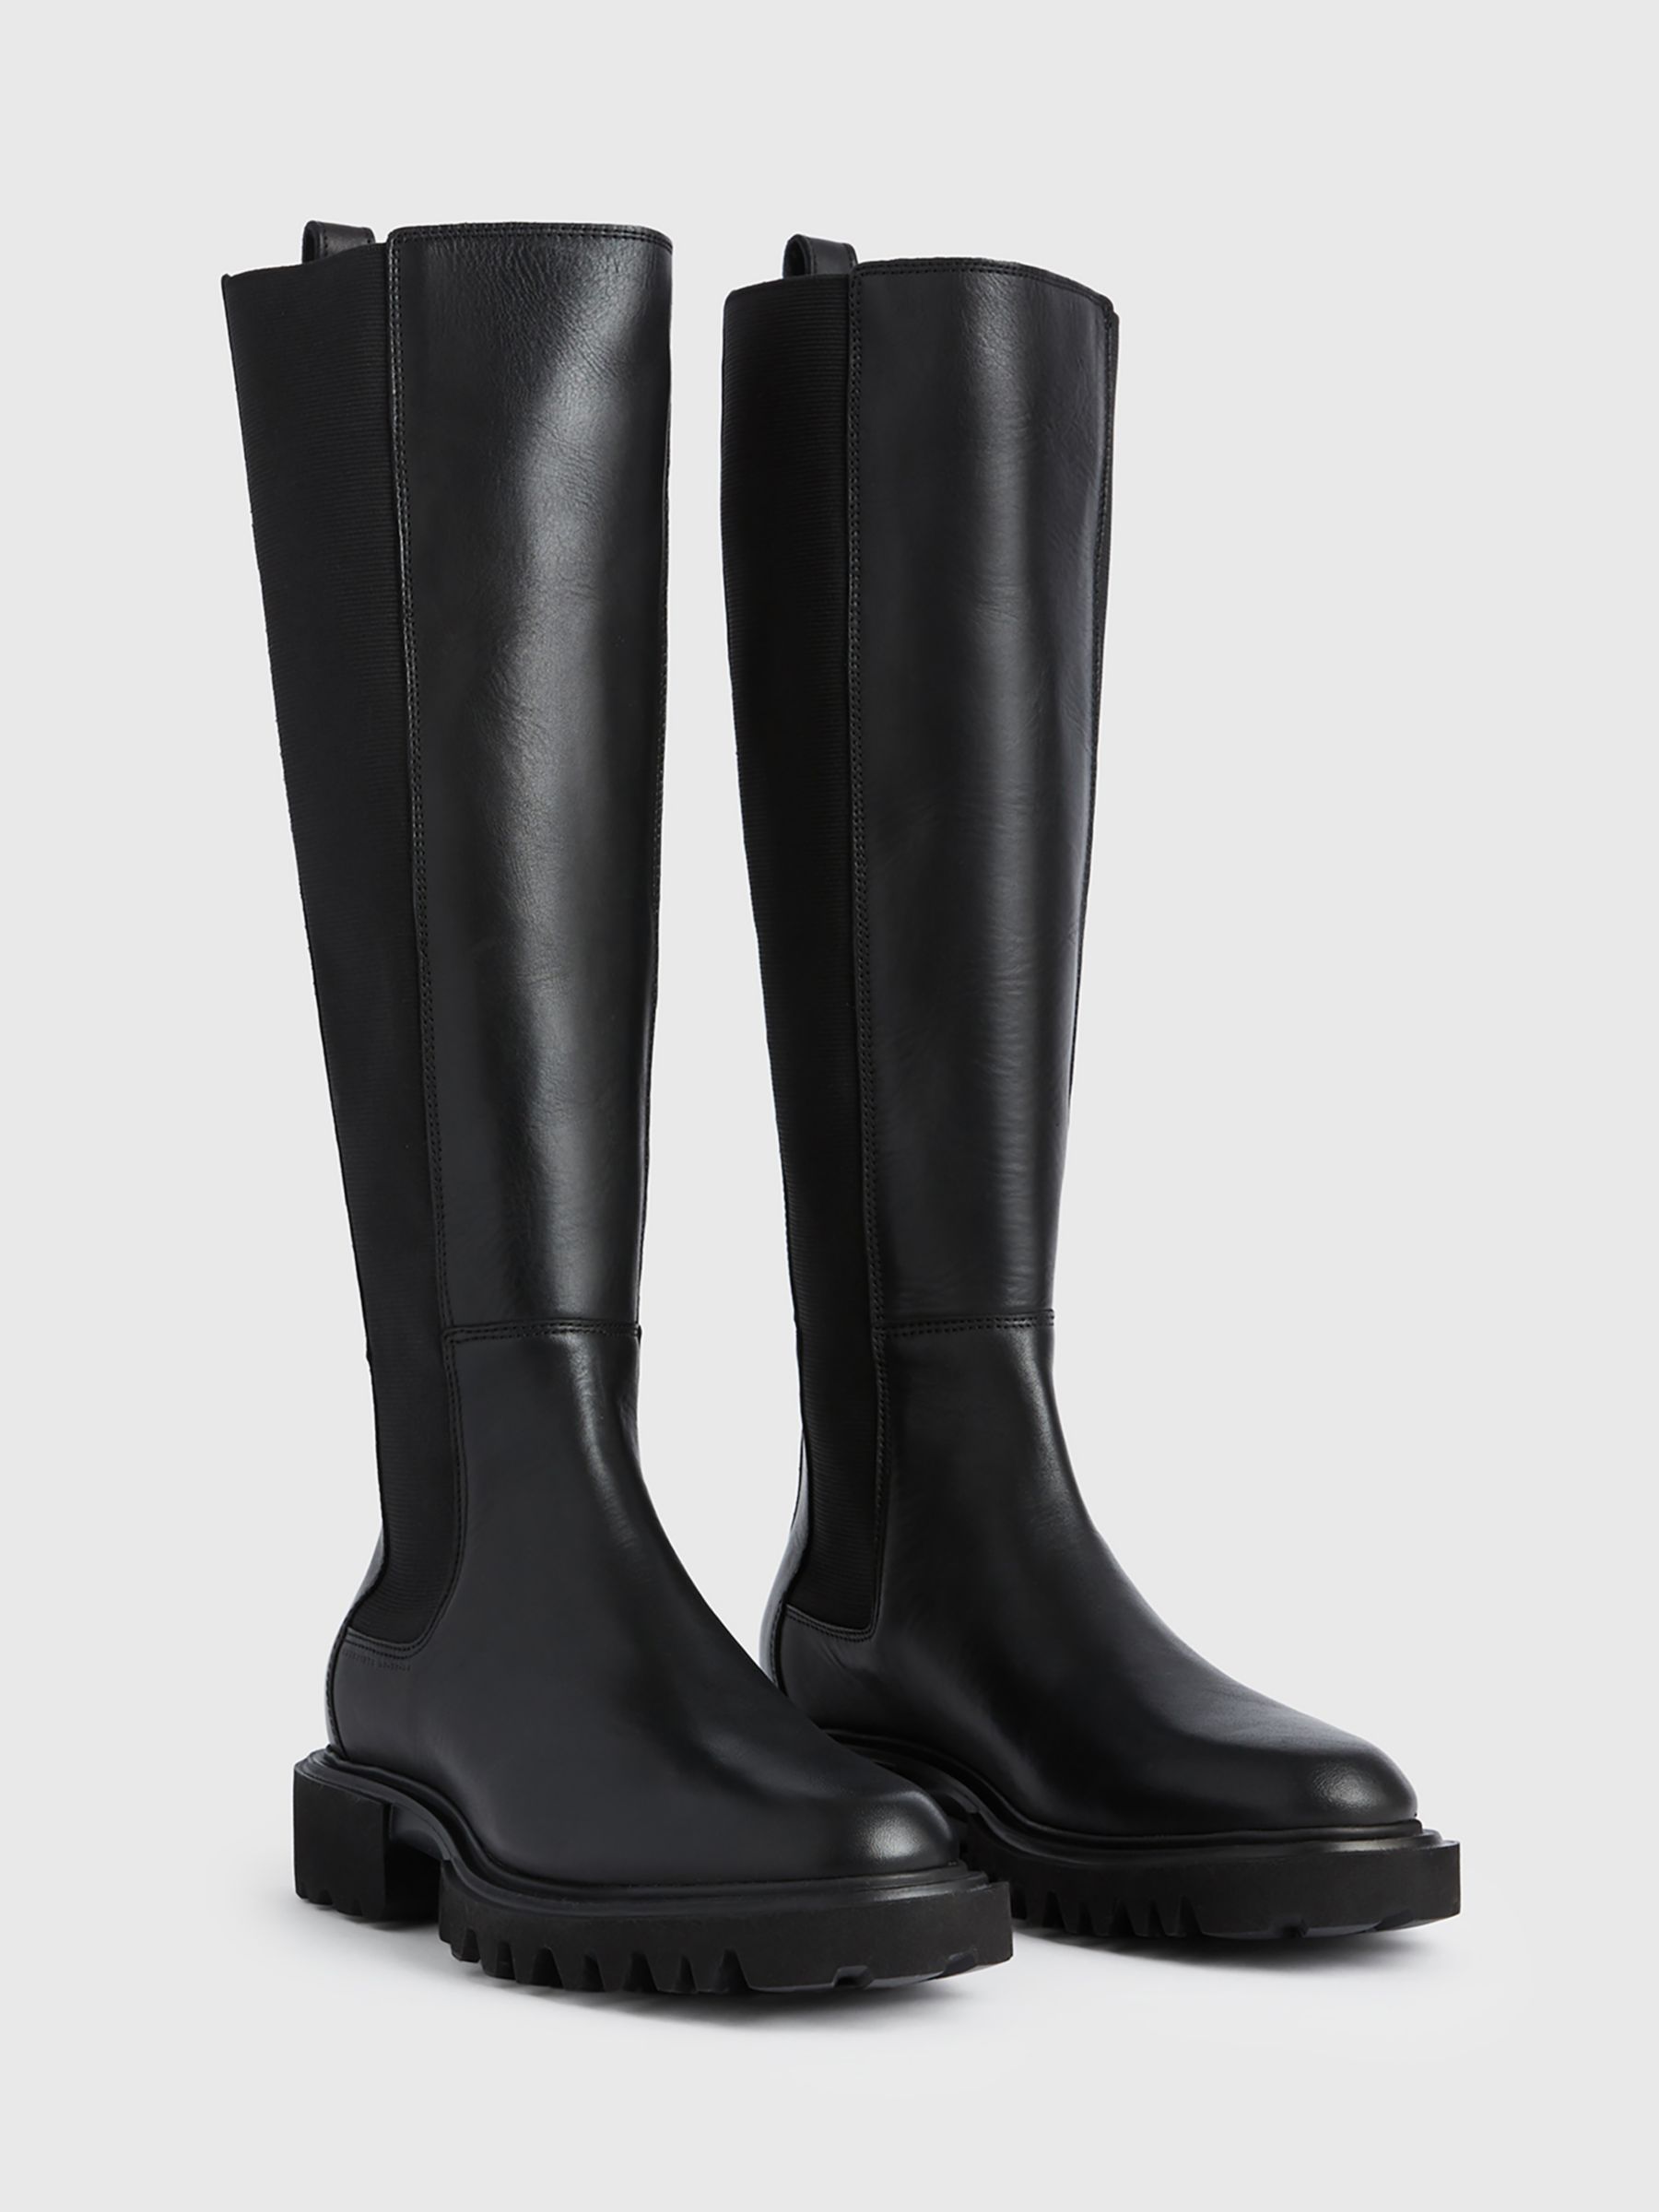 AllSaints Maeve Leather Knee High Boots, Black at John Lewis & Partners